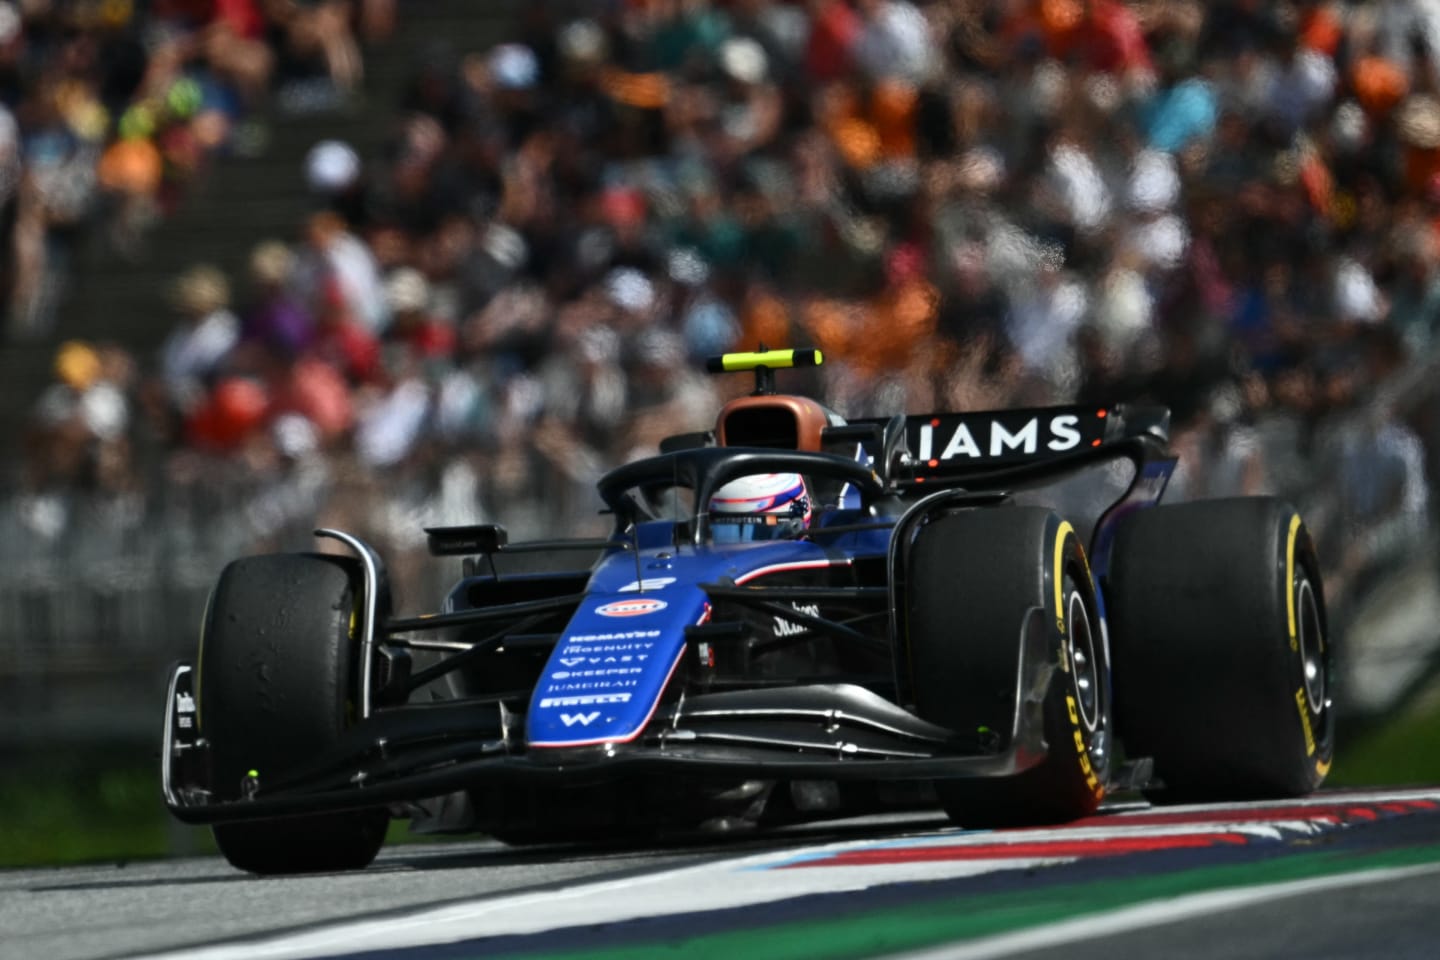 Williams' US driver Logan Sargeant competes during the Formula One Austrian Grand Prix on the Red